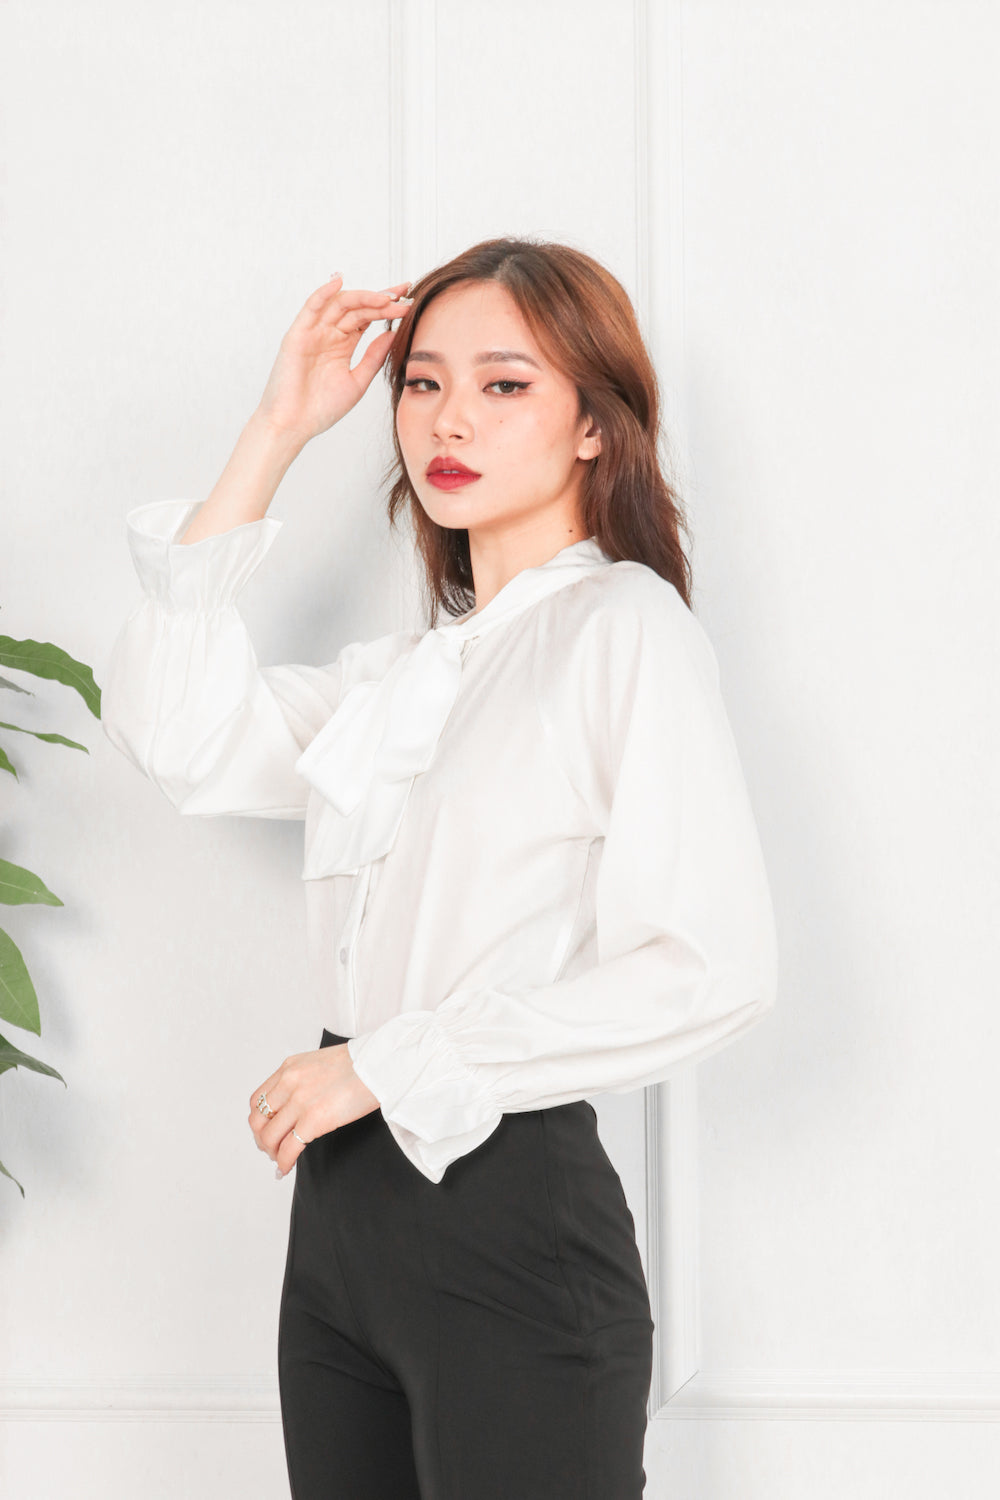 * PREMIUM * - Fleulia Ribbon Long Sleeve Top in White - SELF MANUFACTURED BY LBRLABEL